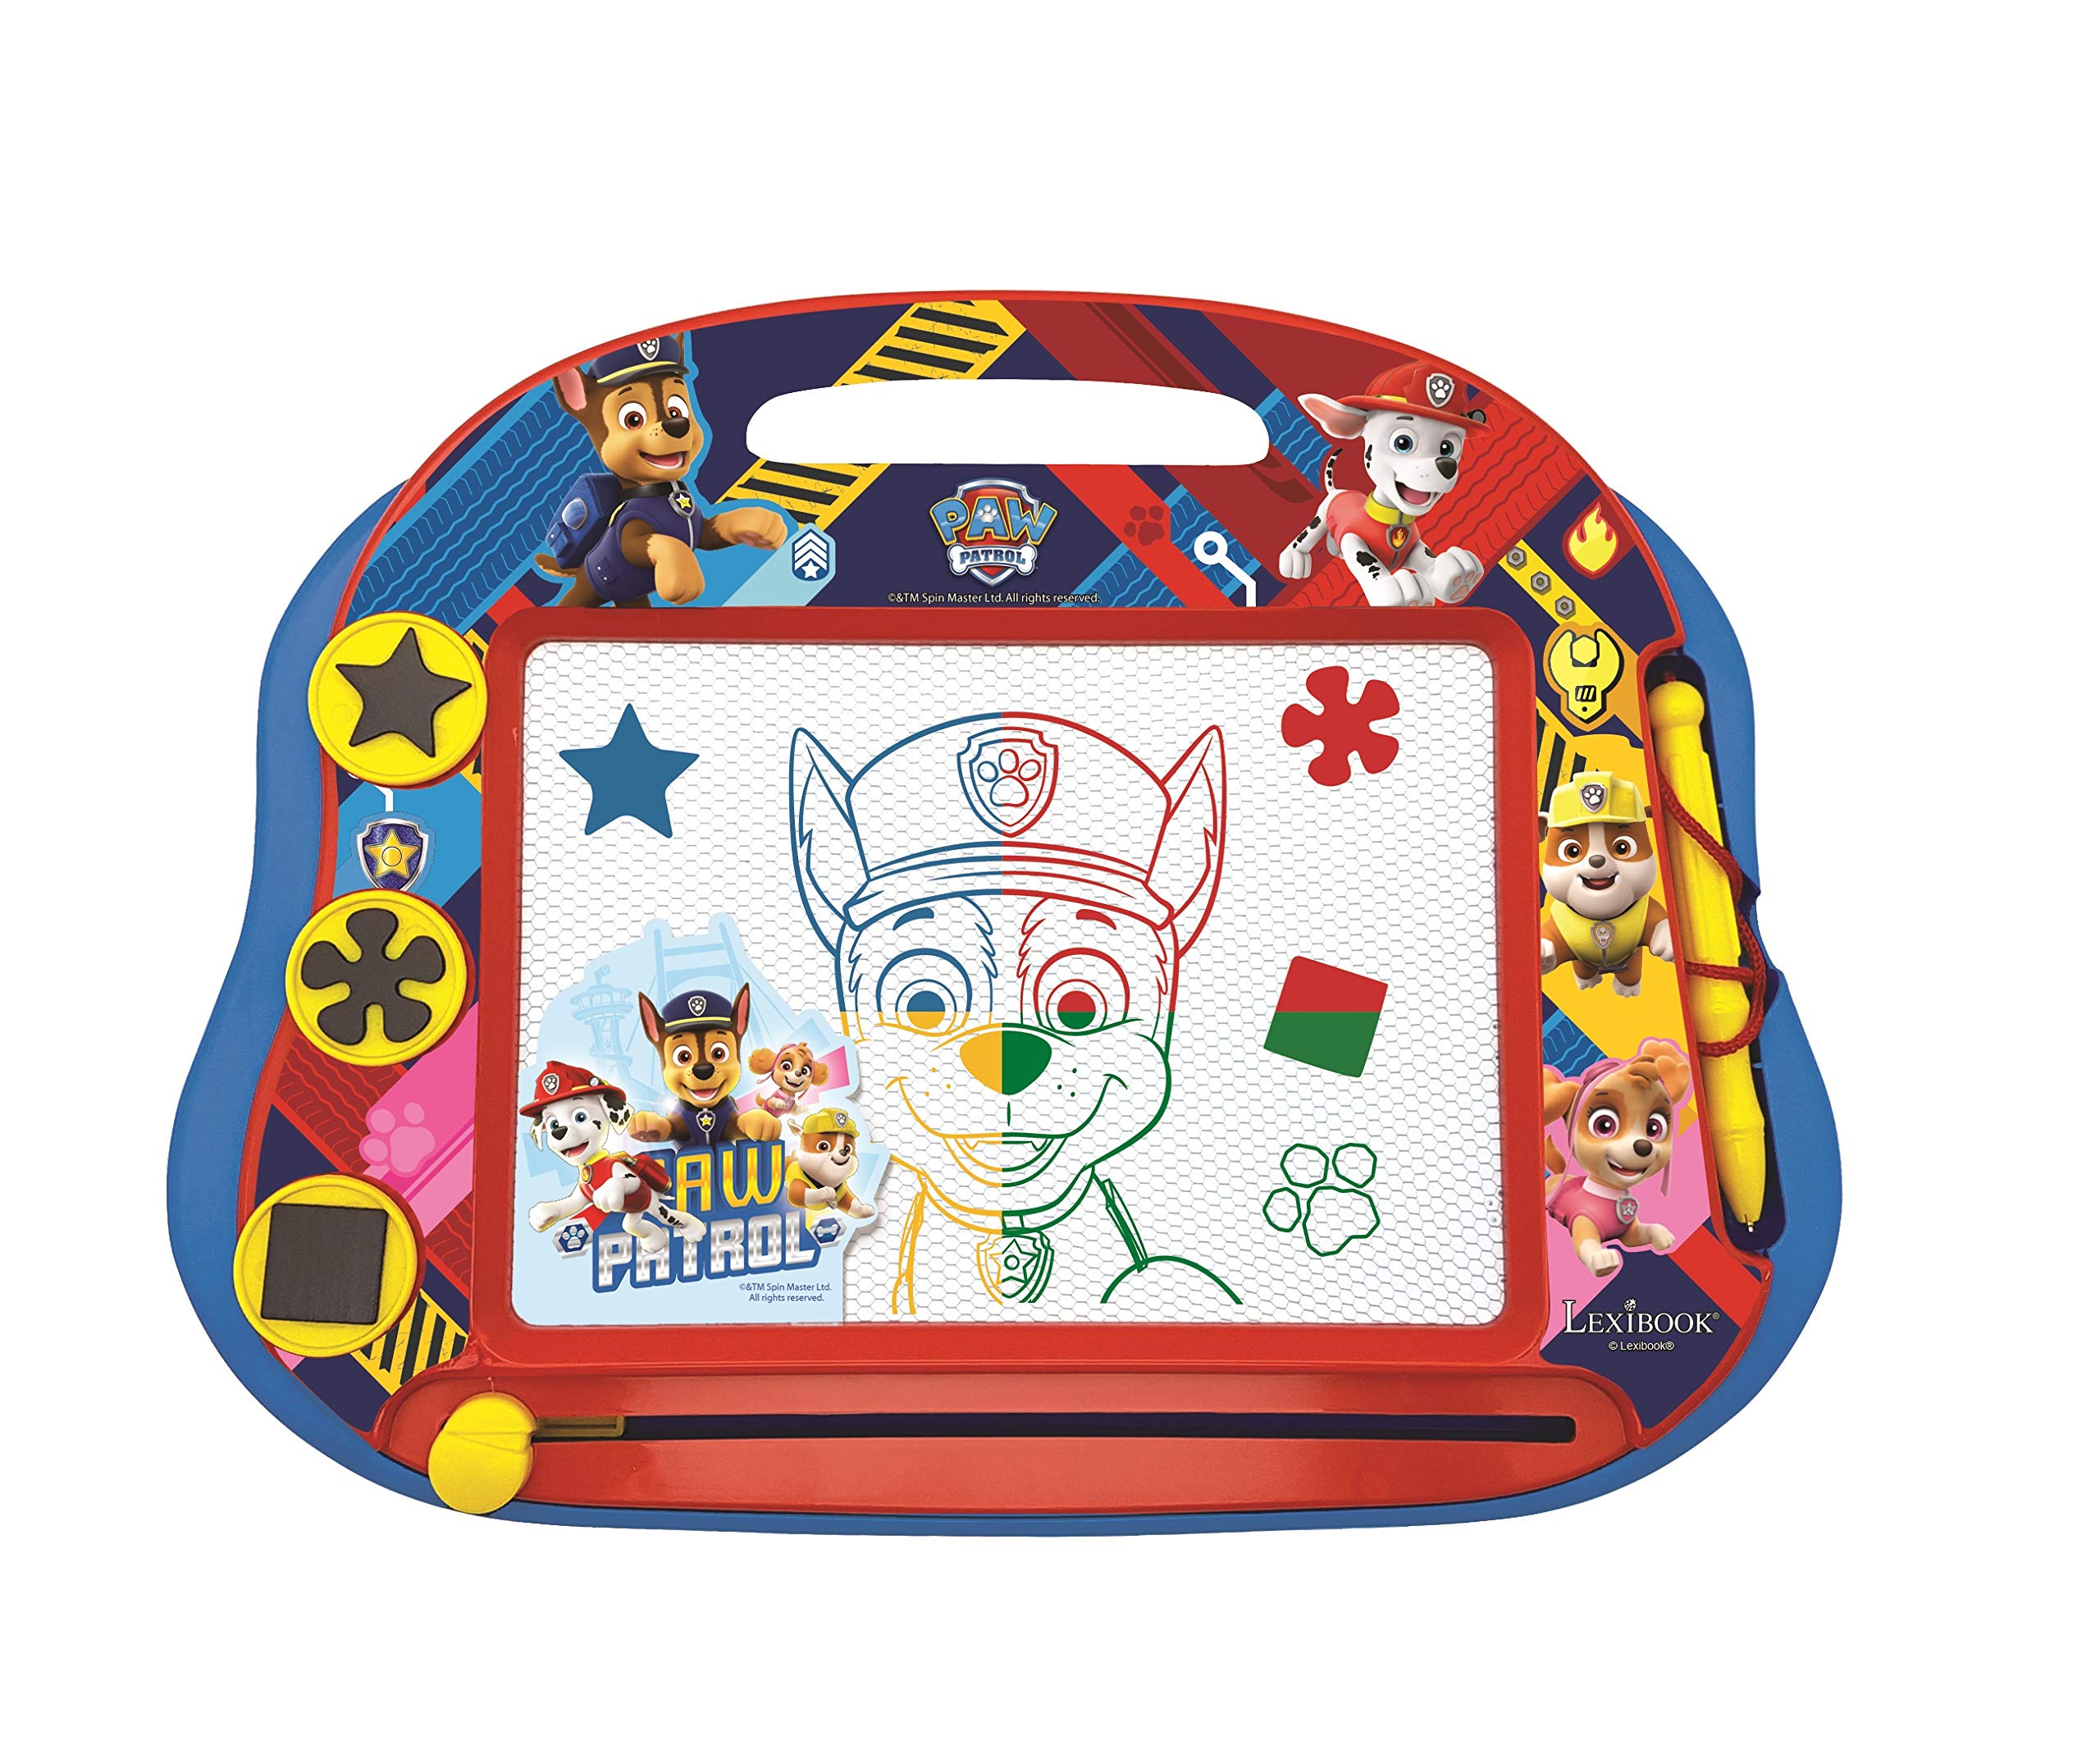 LEXIBOOK CRPA550 Multicolor Magic Magnetic Paw Patrol Drawing Board, Artistic Creative Toy for Girls and Boys, Stylus Pen and Stamps, Red/Blue